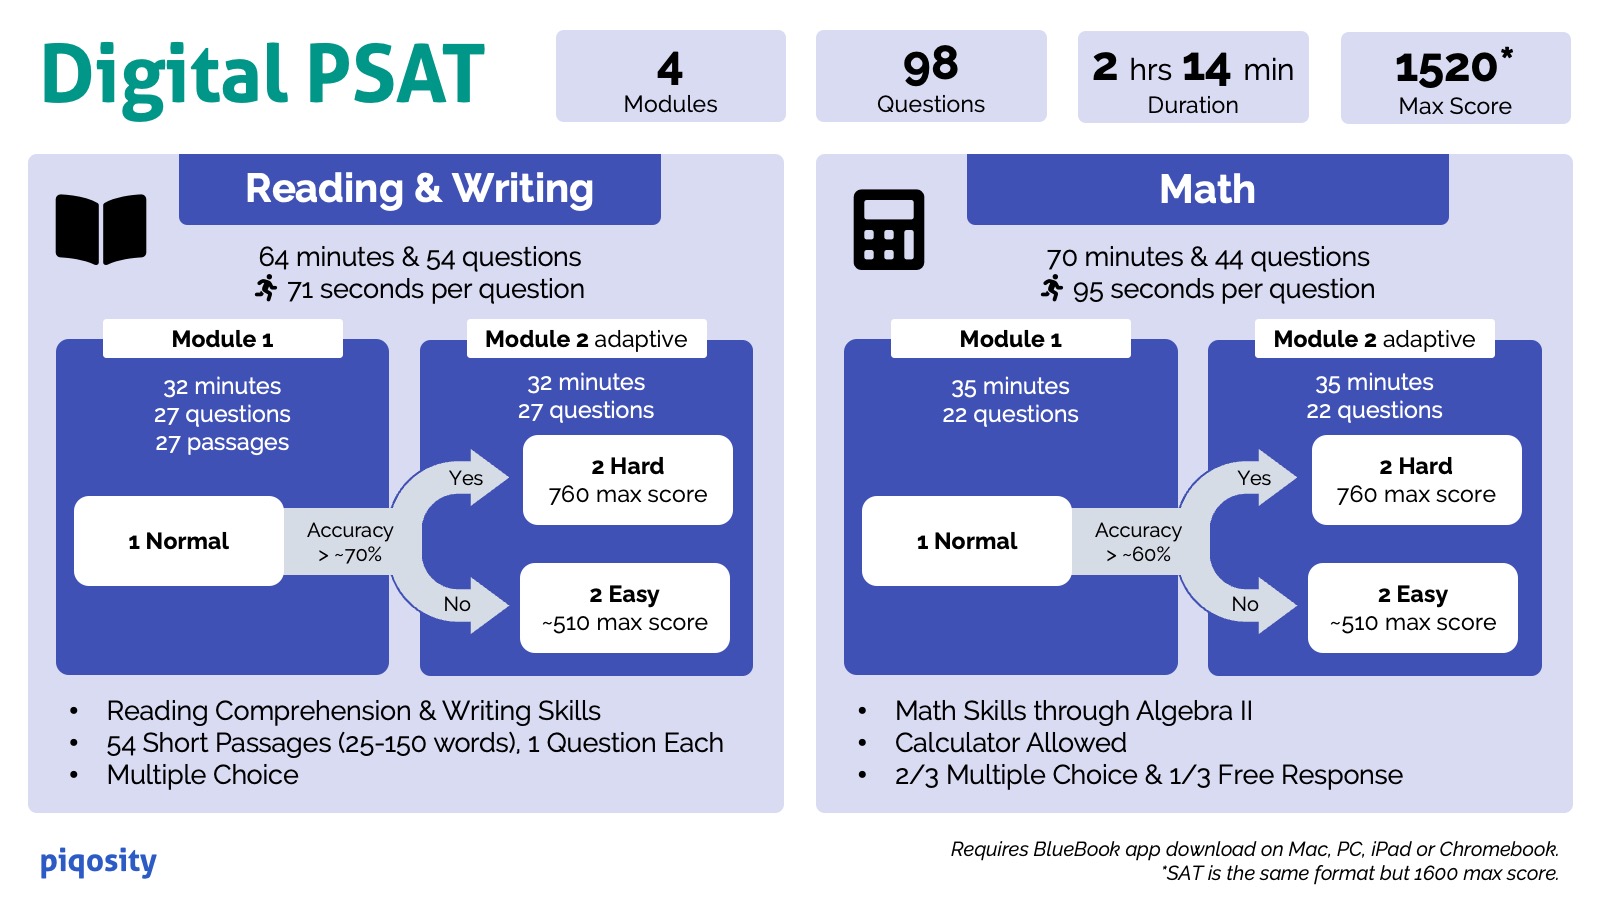 Digital PSAT Infographic including format, timing, and strategies.